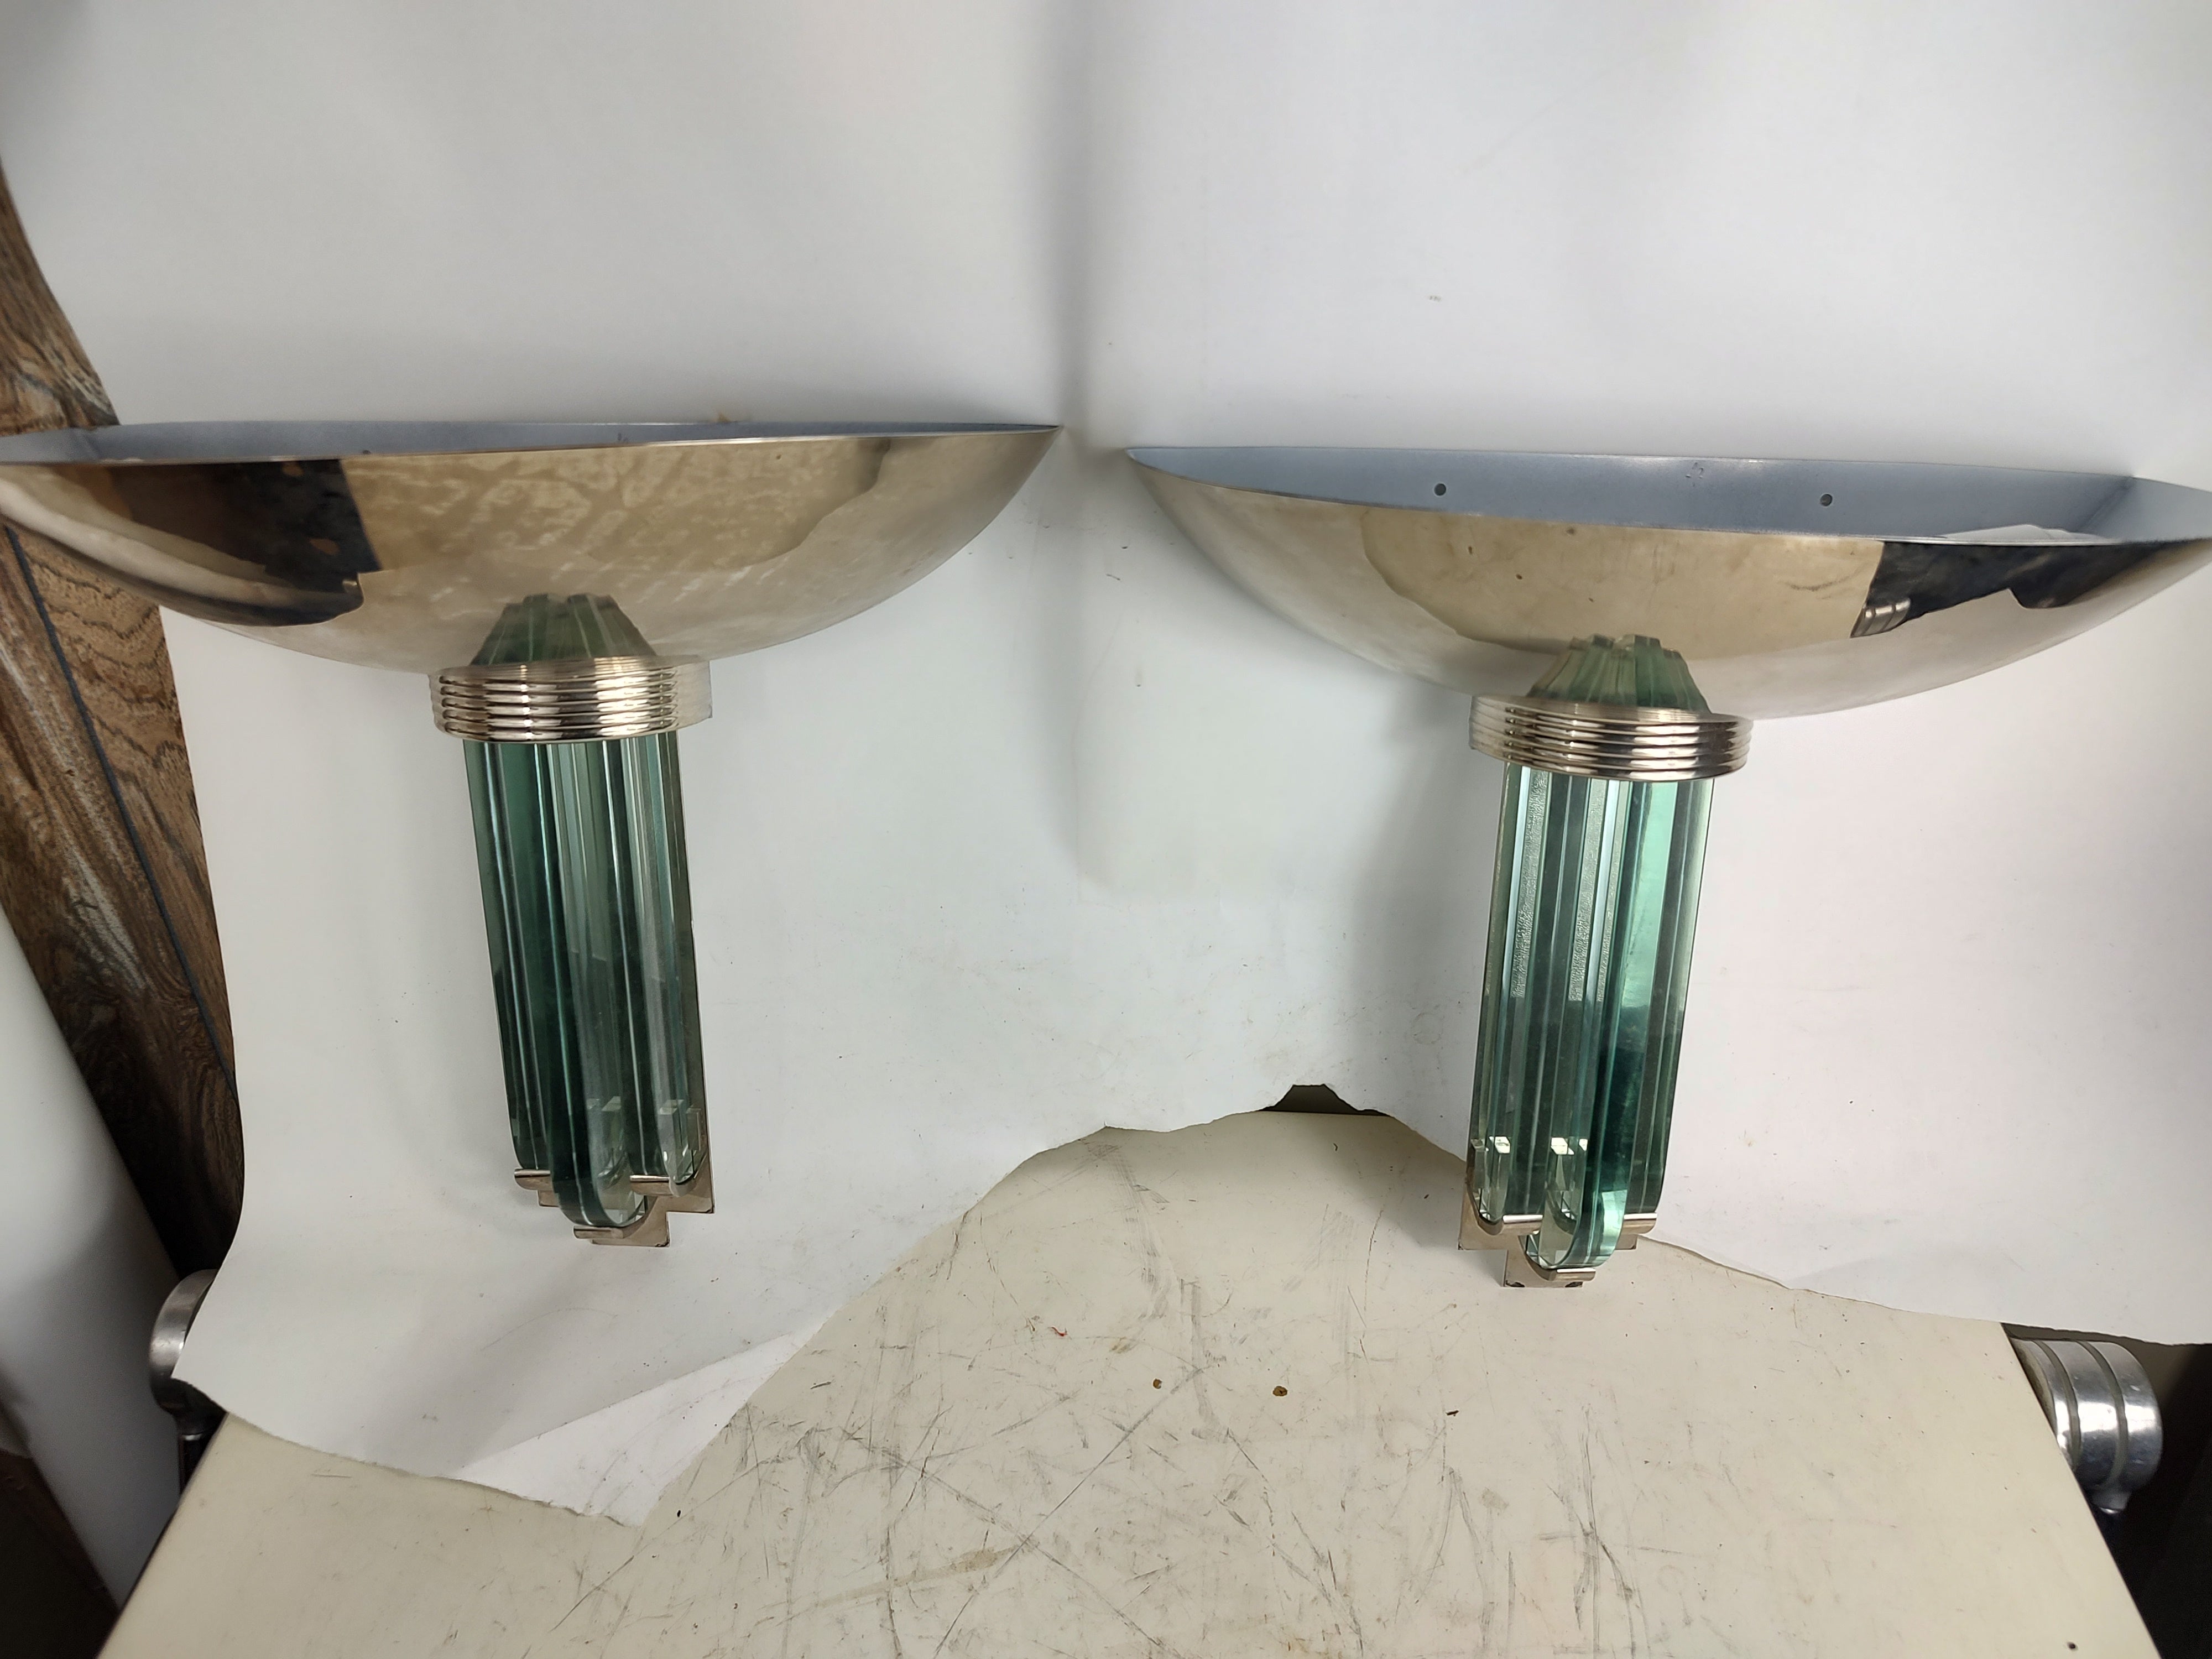 Fabulous simple yet elegant pair of high quality Art Deco styled wall sconces. Heavy thick glass in a vertical position supporting a large chrome dish with two incandescent sockets supplying the illumination. In excellent vintage condition with